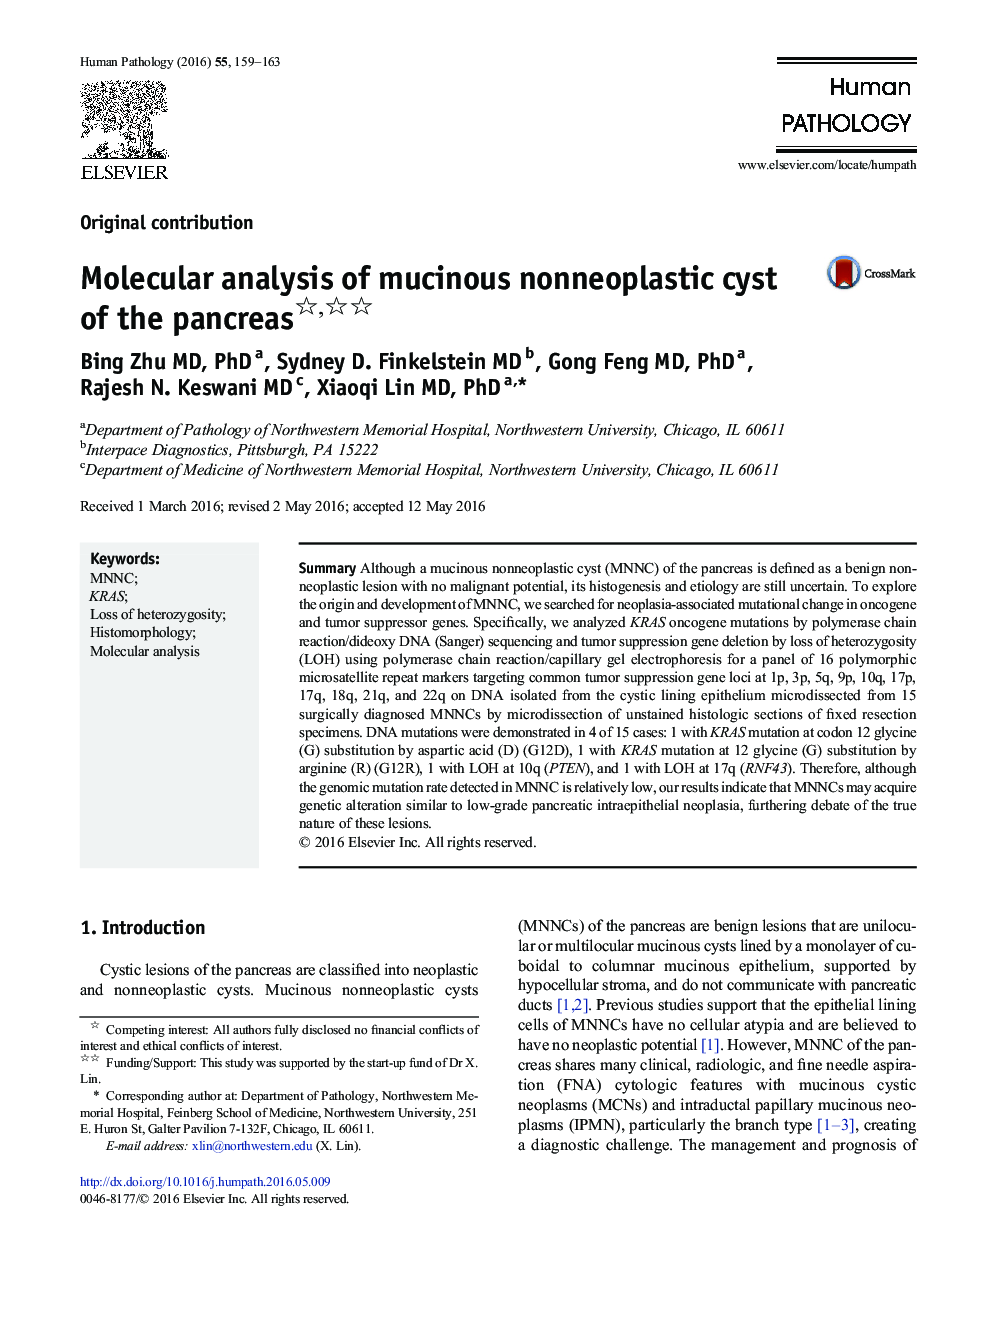 Molecular analysis of mucinous nonneoplastic cyst of the pancreas